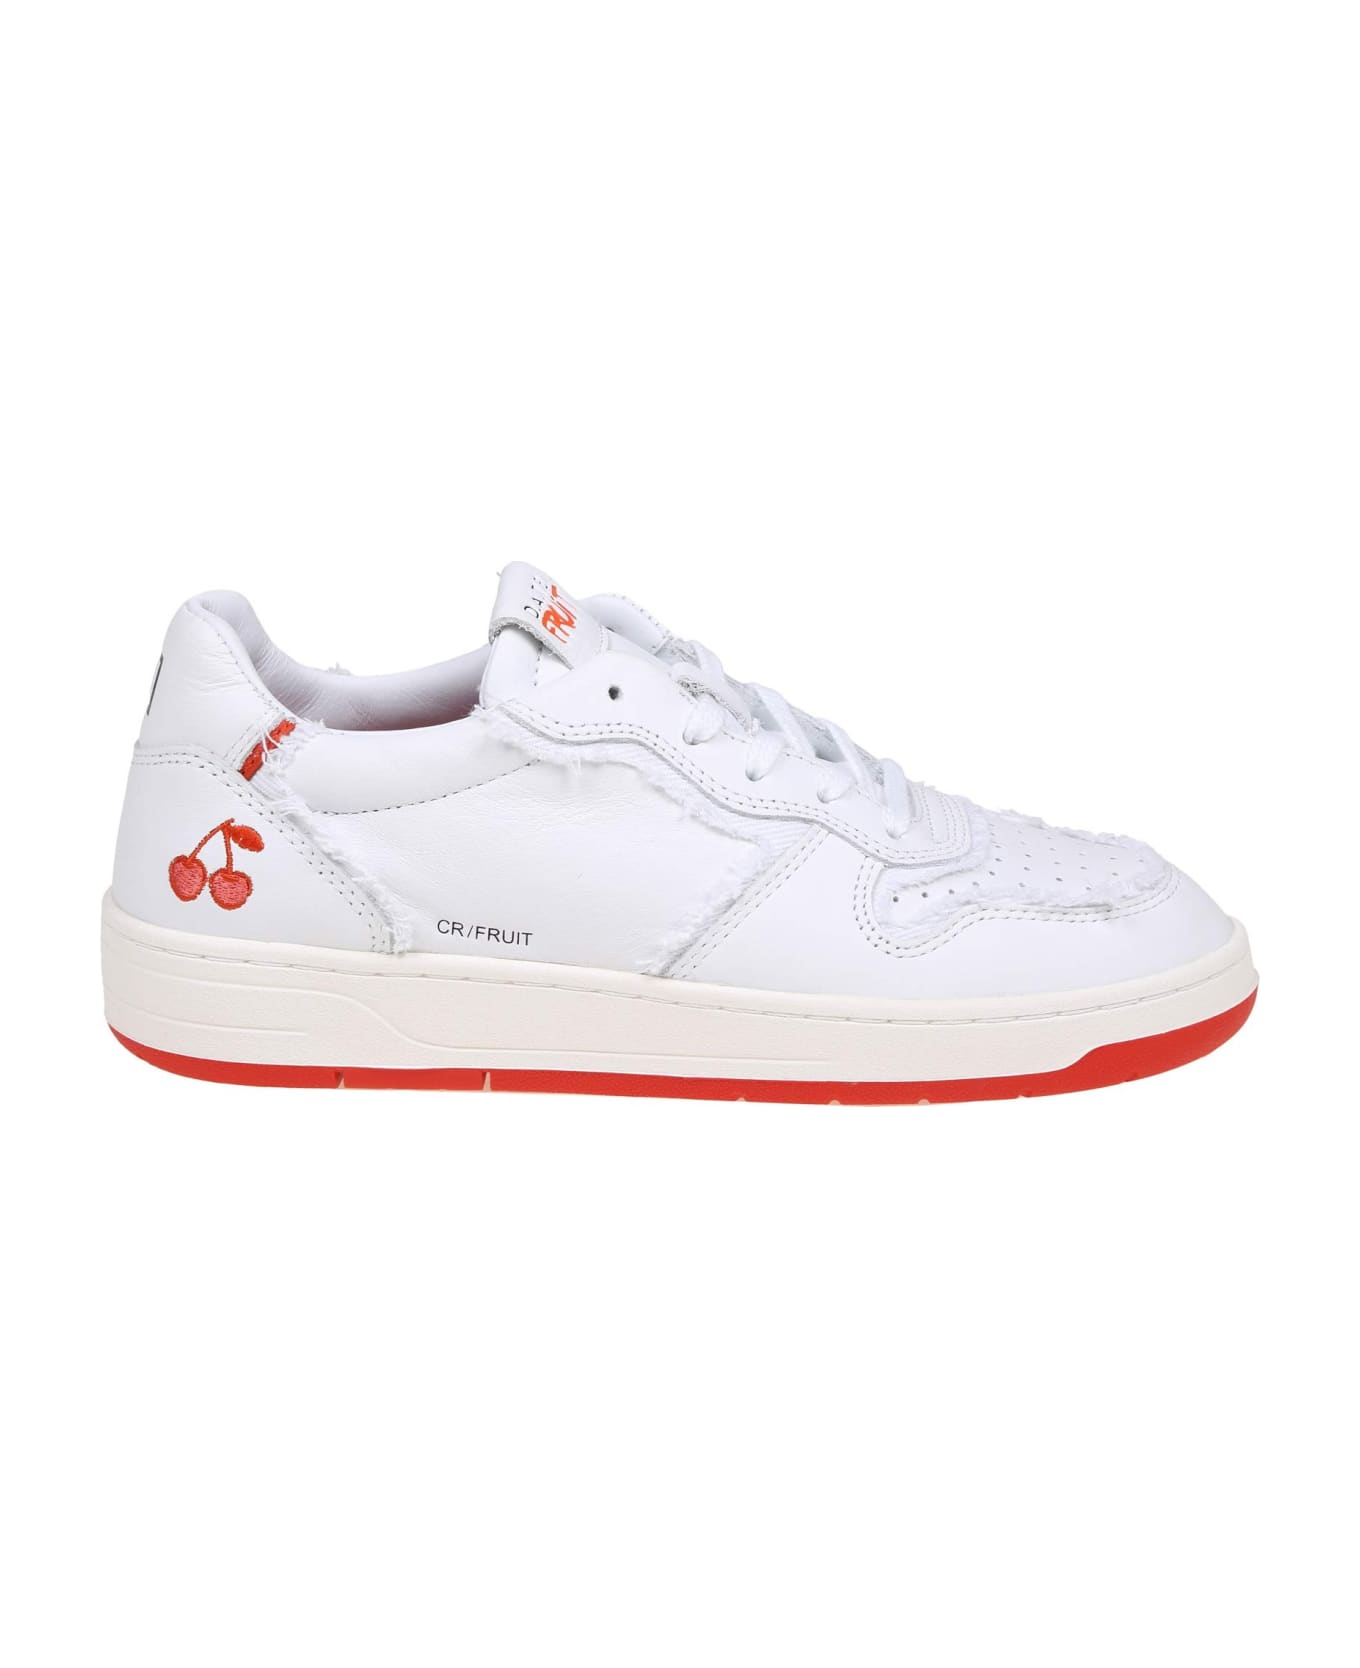 D.A.T.E. Court Sneakers In White Leather - CHERRY